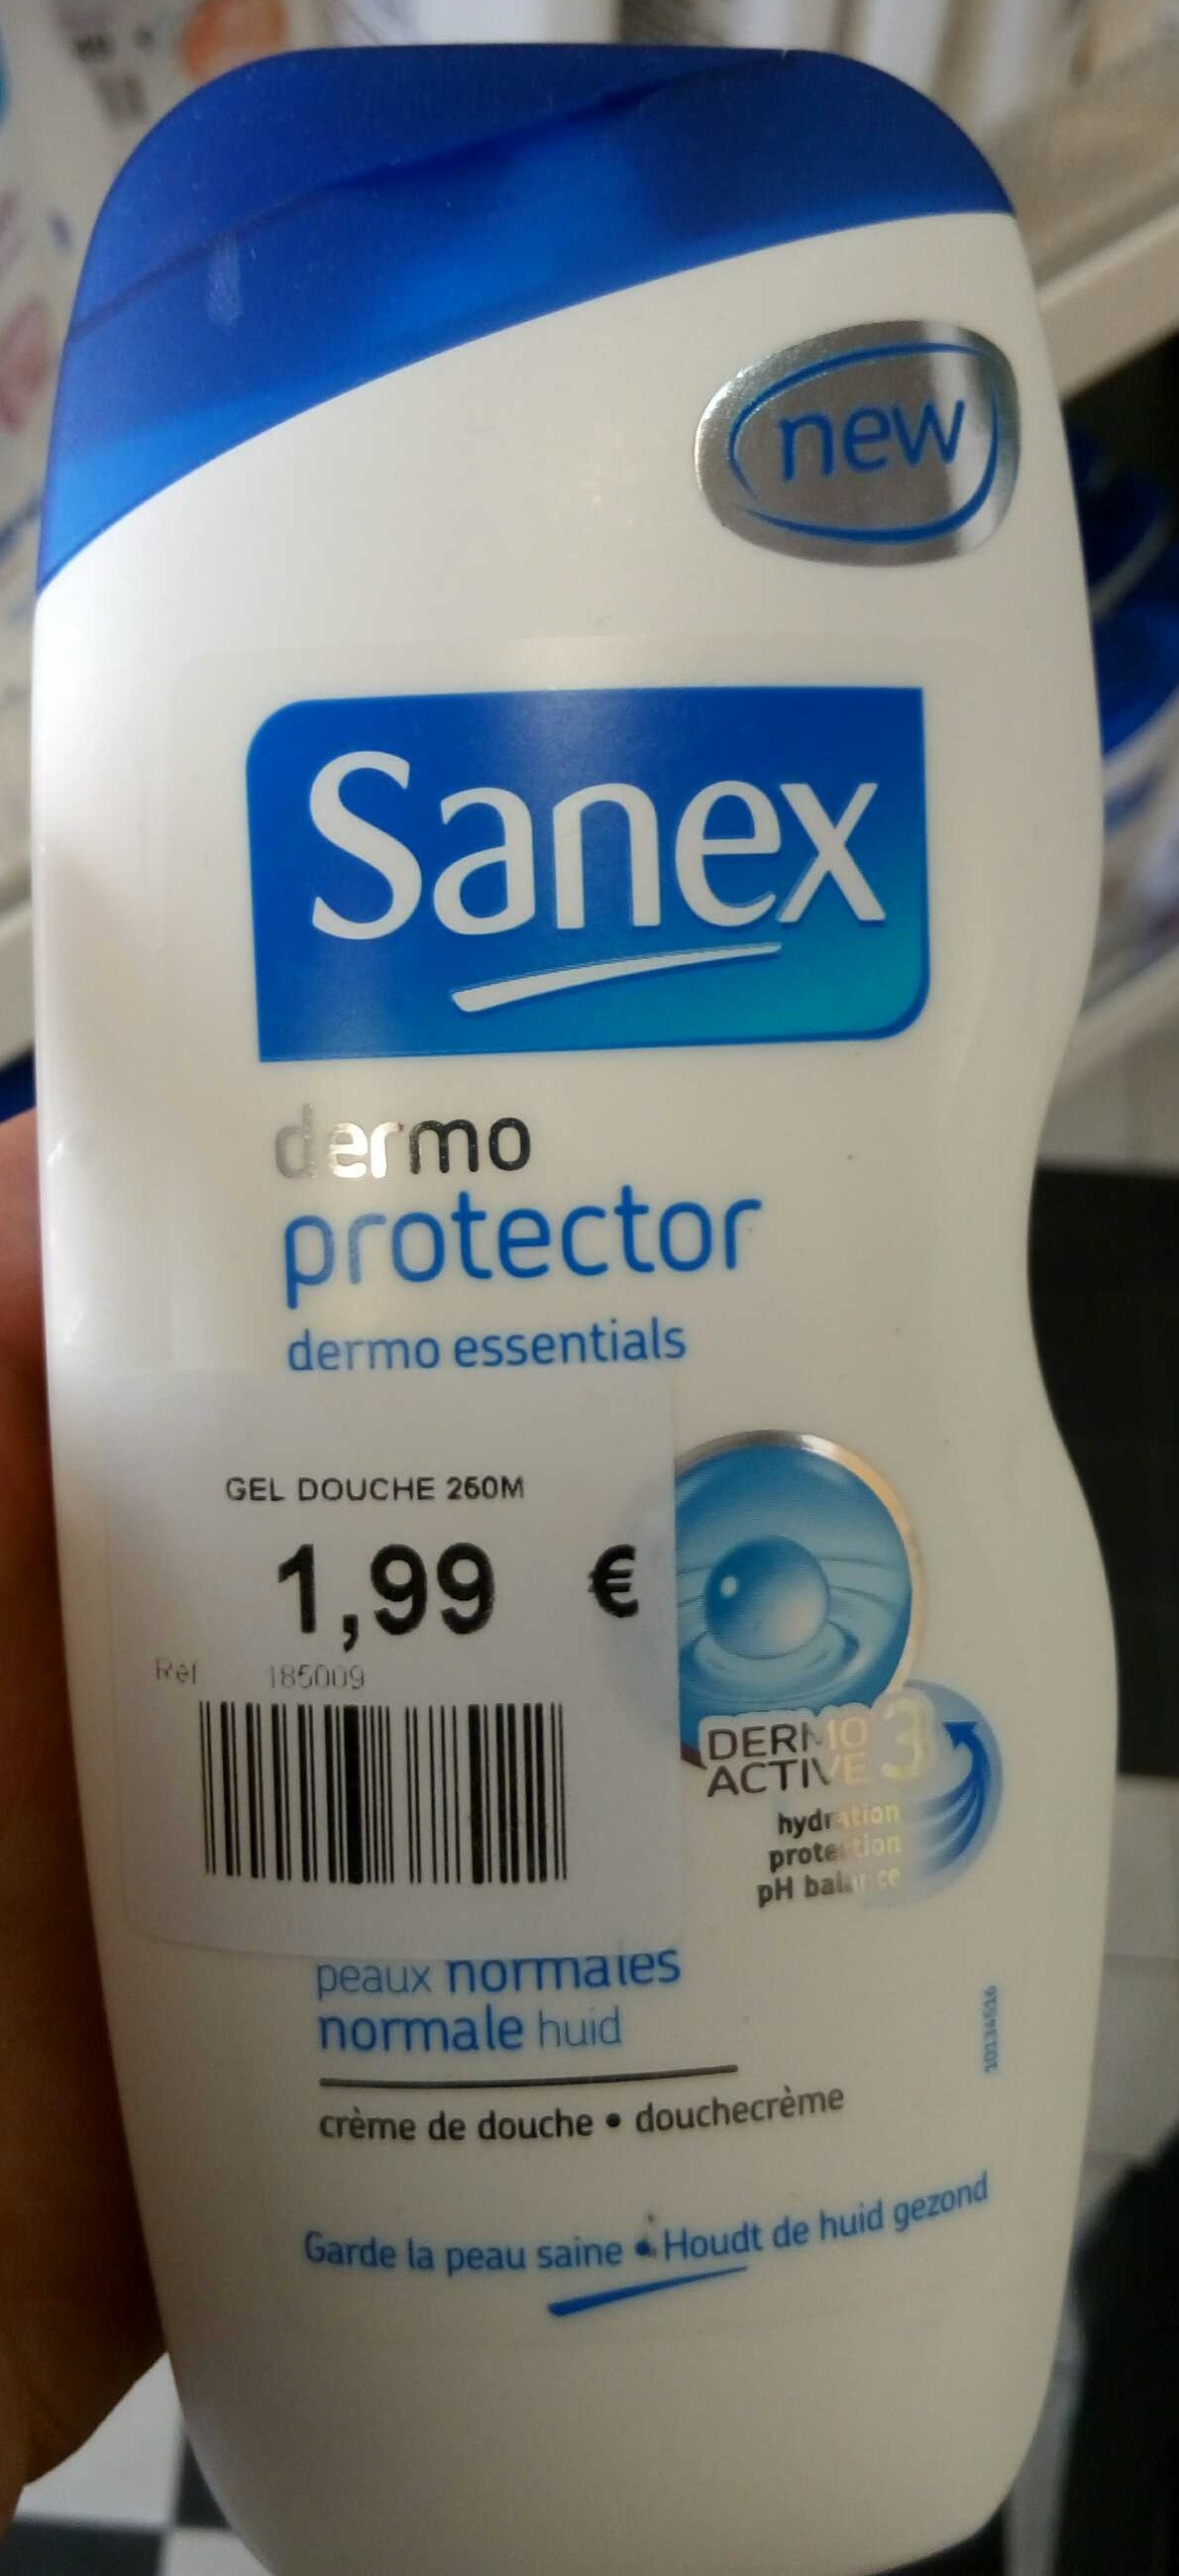 Sanex dermo protector - peaux normales - Product - fr